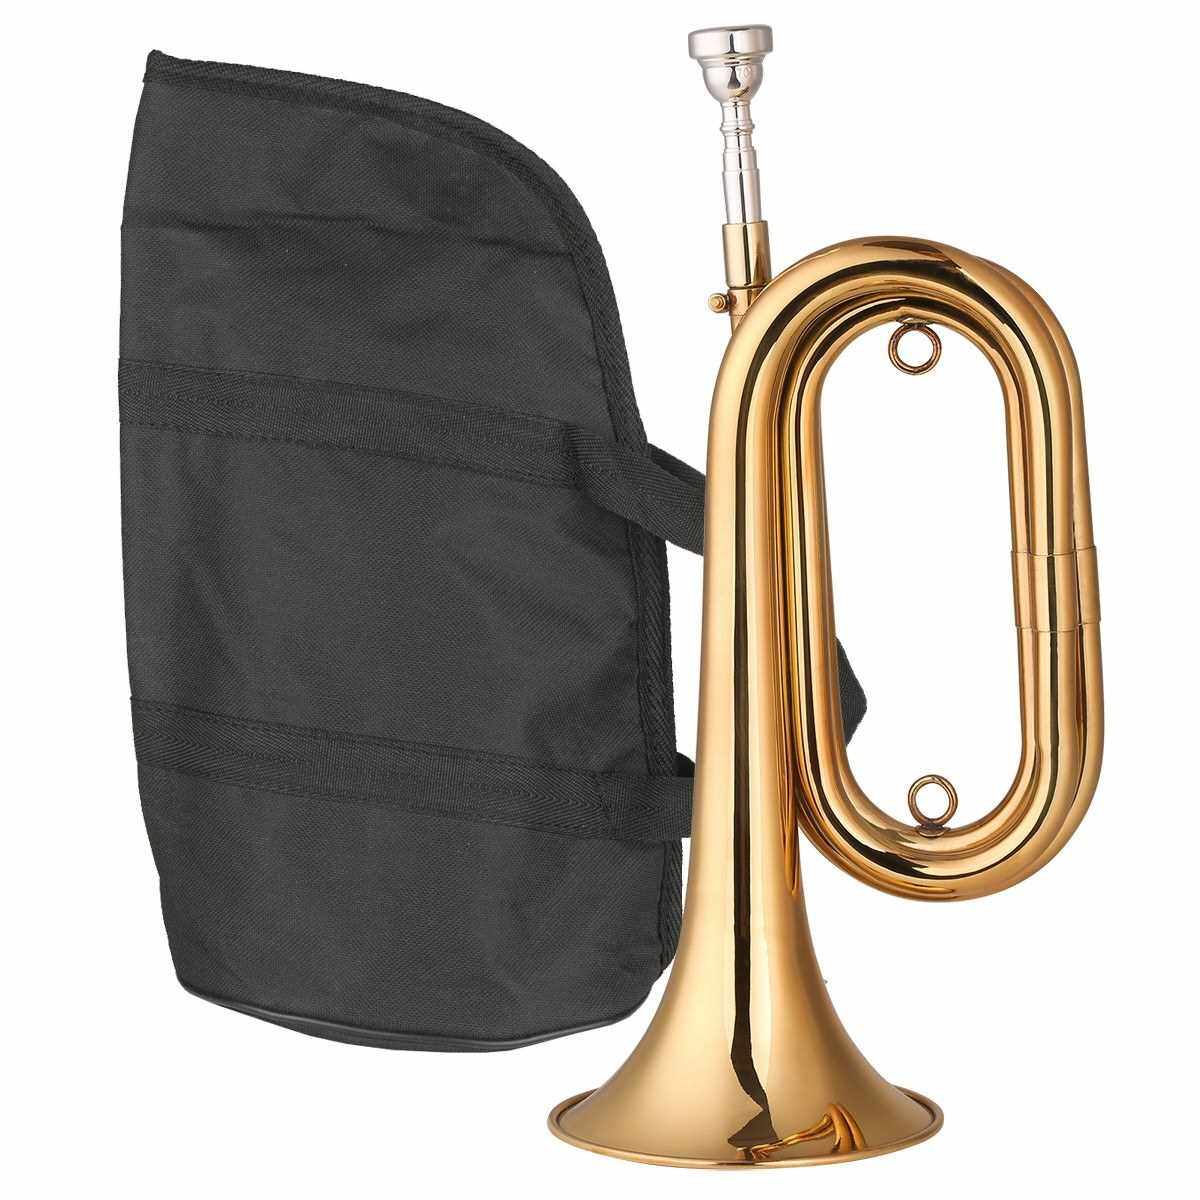 Brass Bugle Call Gold-Plated Trumpet Cavalry Horn with Mouthpiece Carrying Bag Musical Instrument for Beginners School Band Military Orchestra (13.5 Inch) (Standard)